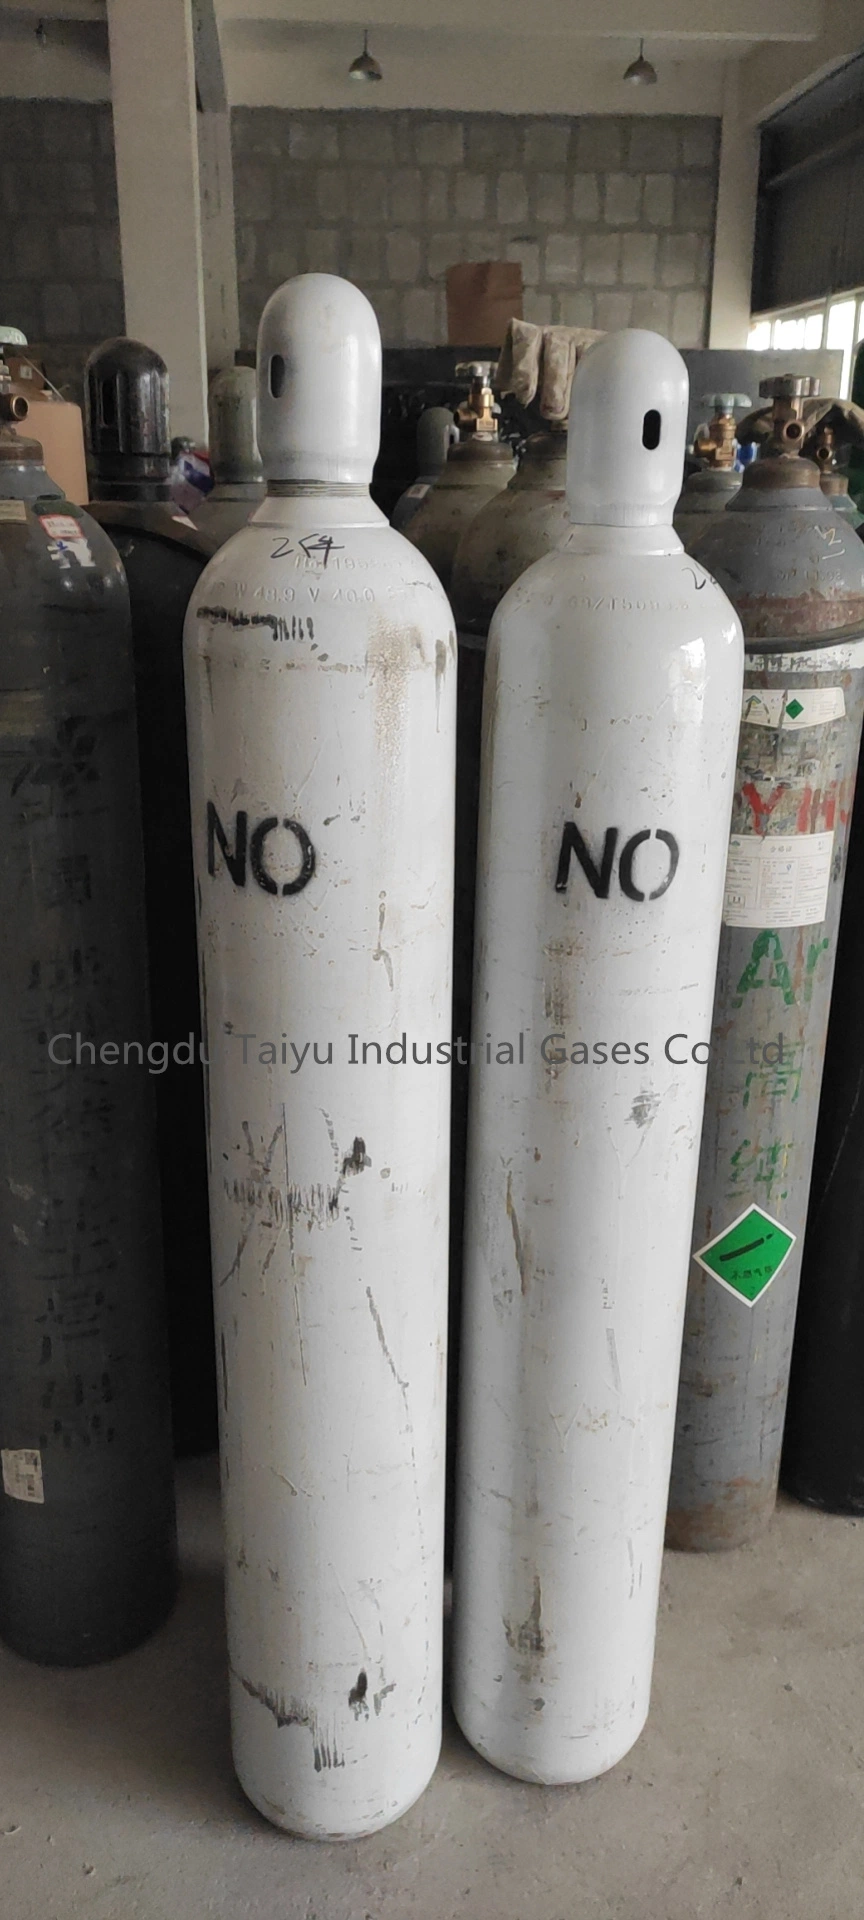 China Factory High Purity 99.9% No Gas Nitric Oxide Medical Gas 1600L Filled in 47L Cylinder